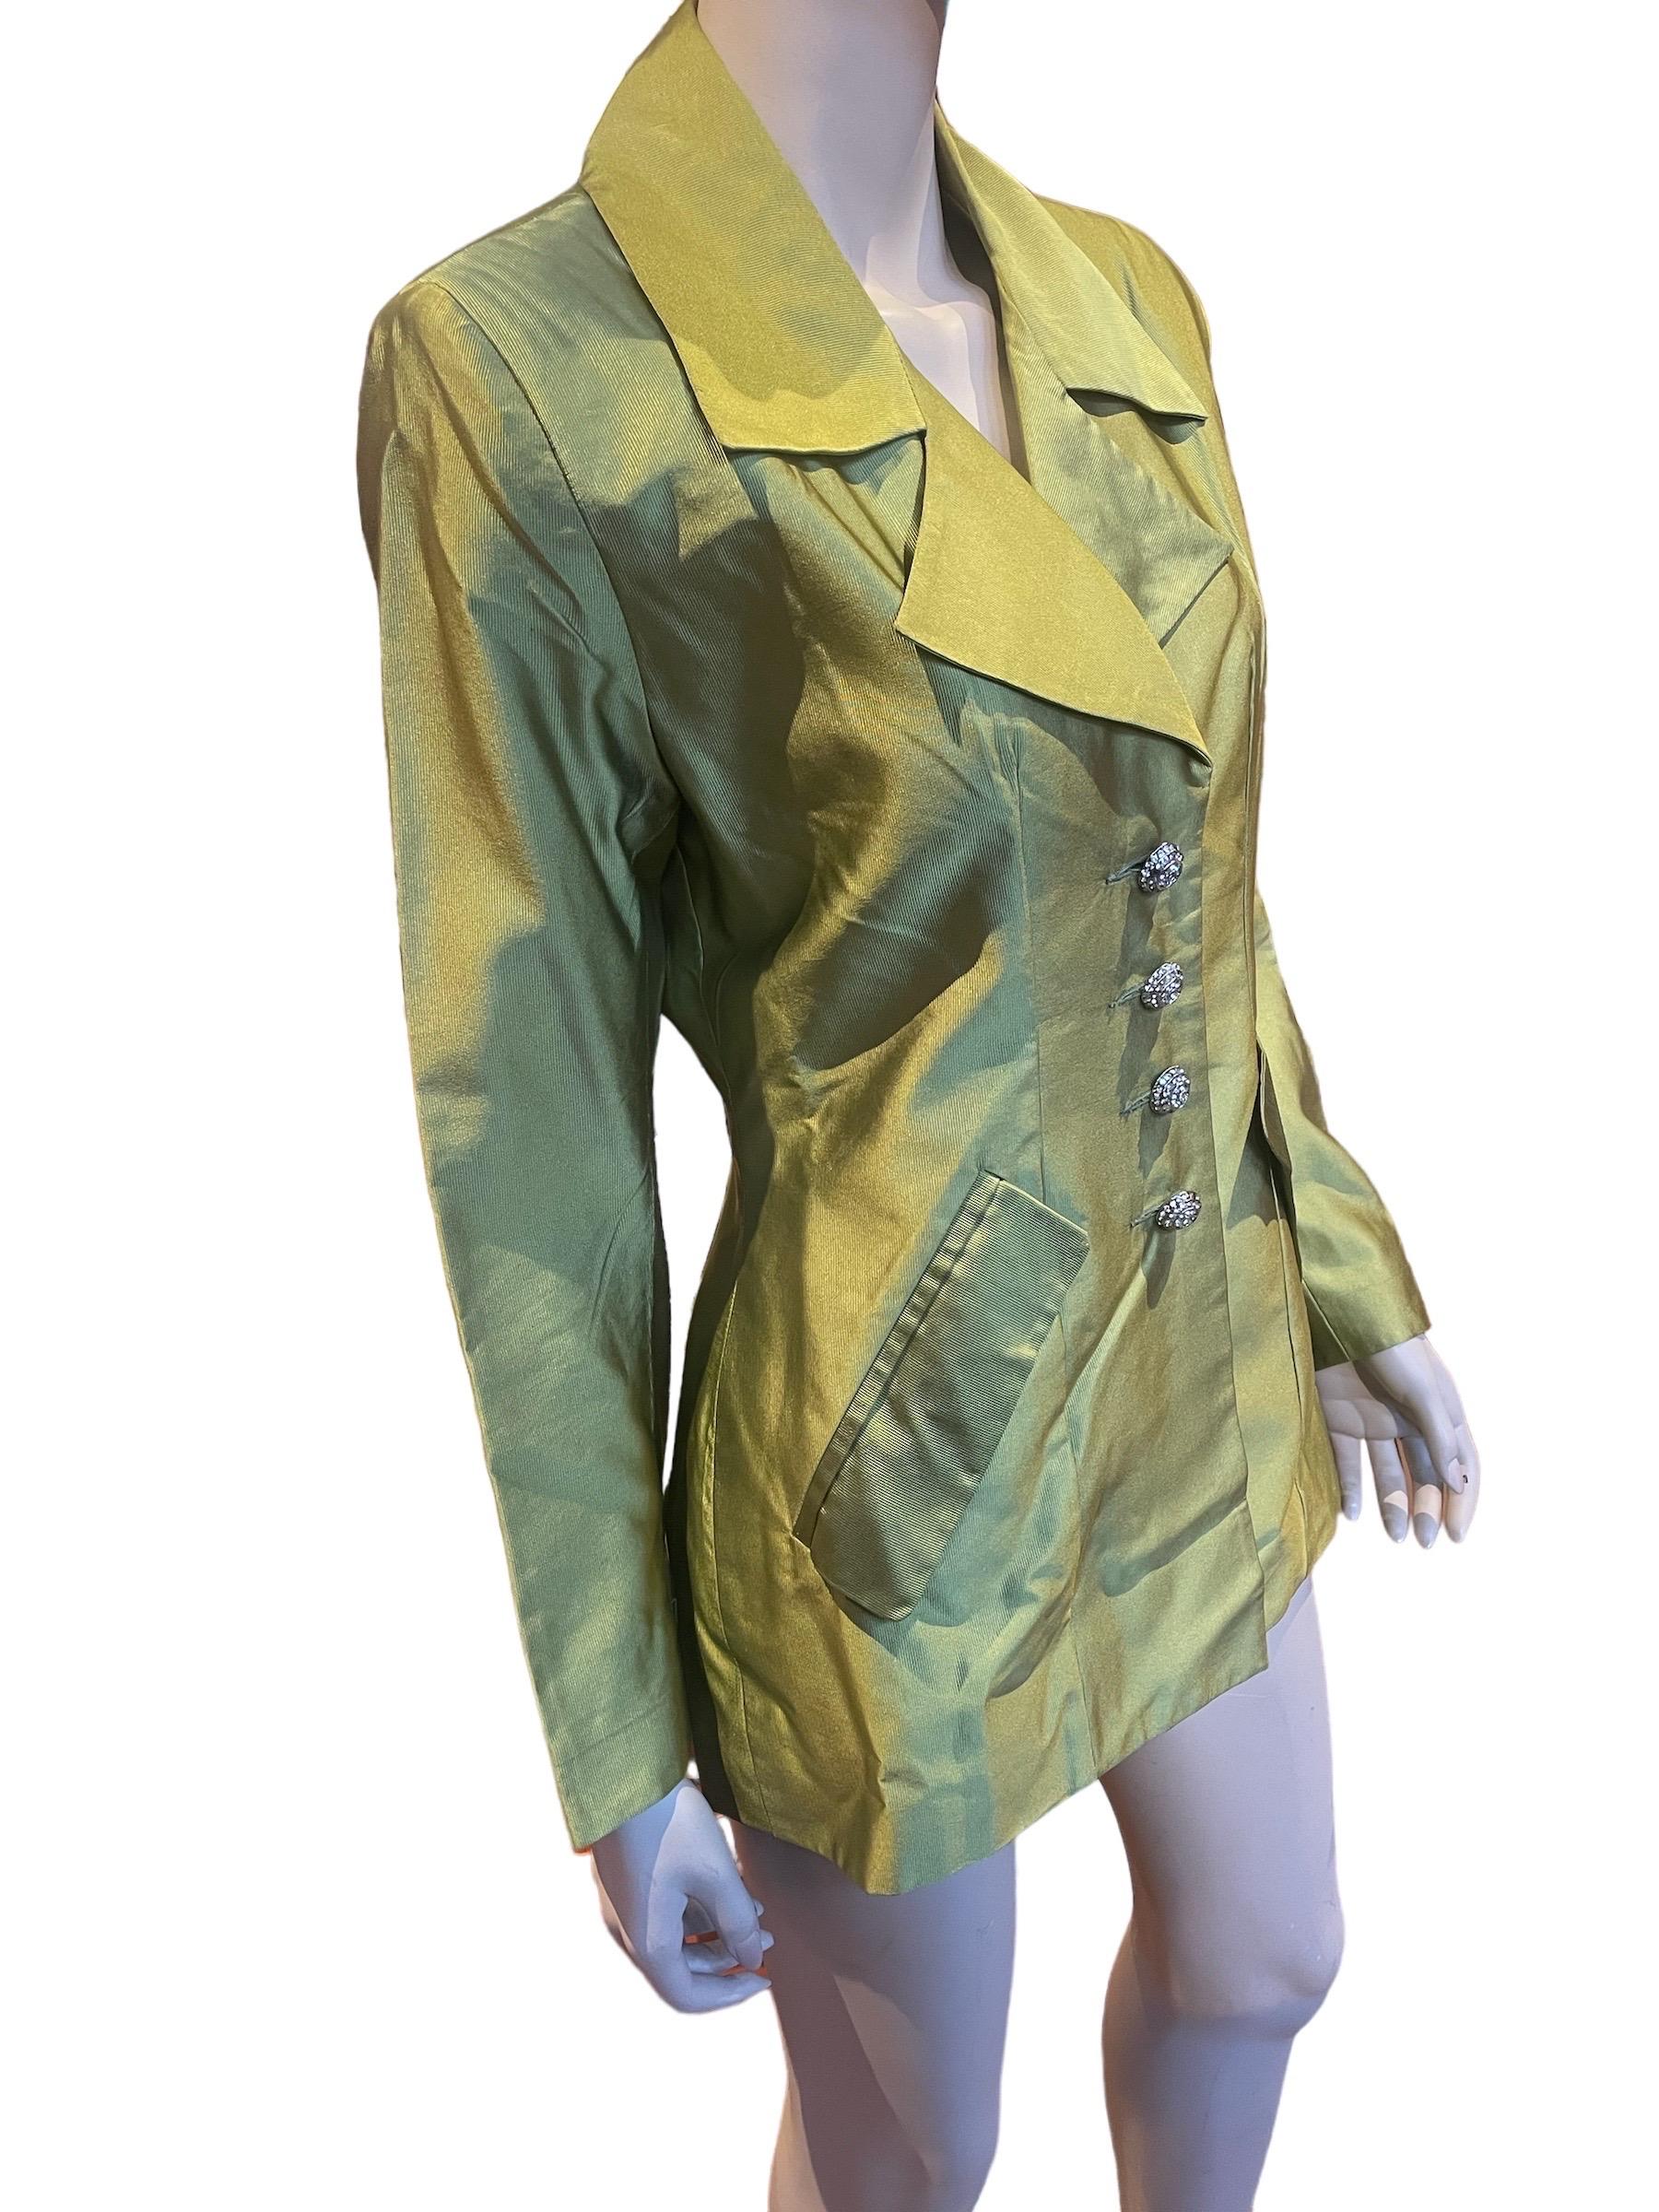 1990s Todd Oldham Silky Olive Green Blazer with Floral Lining 

Beautiful 90s silky olive green blazer with adorable floral lining. Small stained pictured on sleeve and 1 rhinestone missing from the first two buttons. Not very noticeable. 